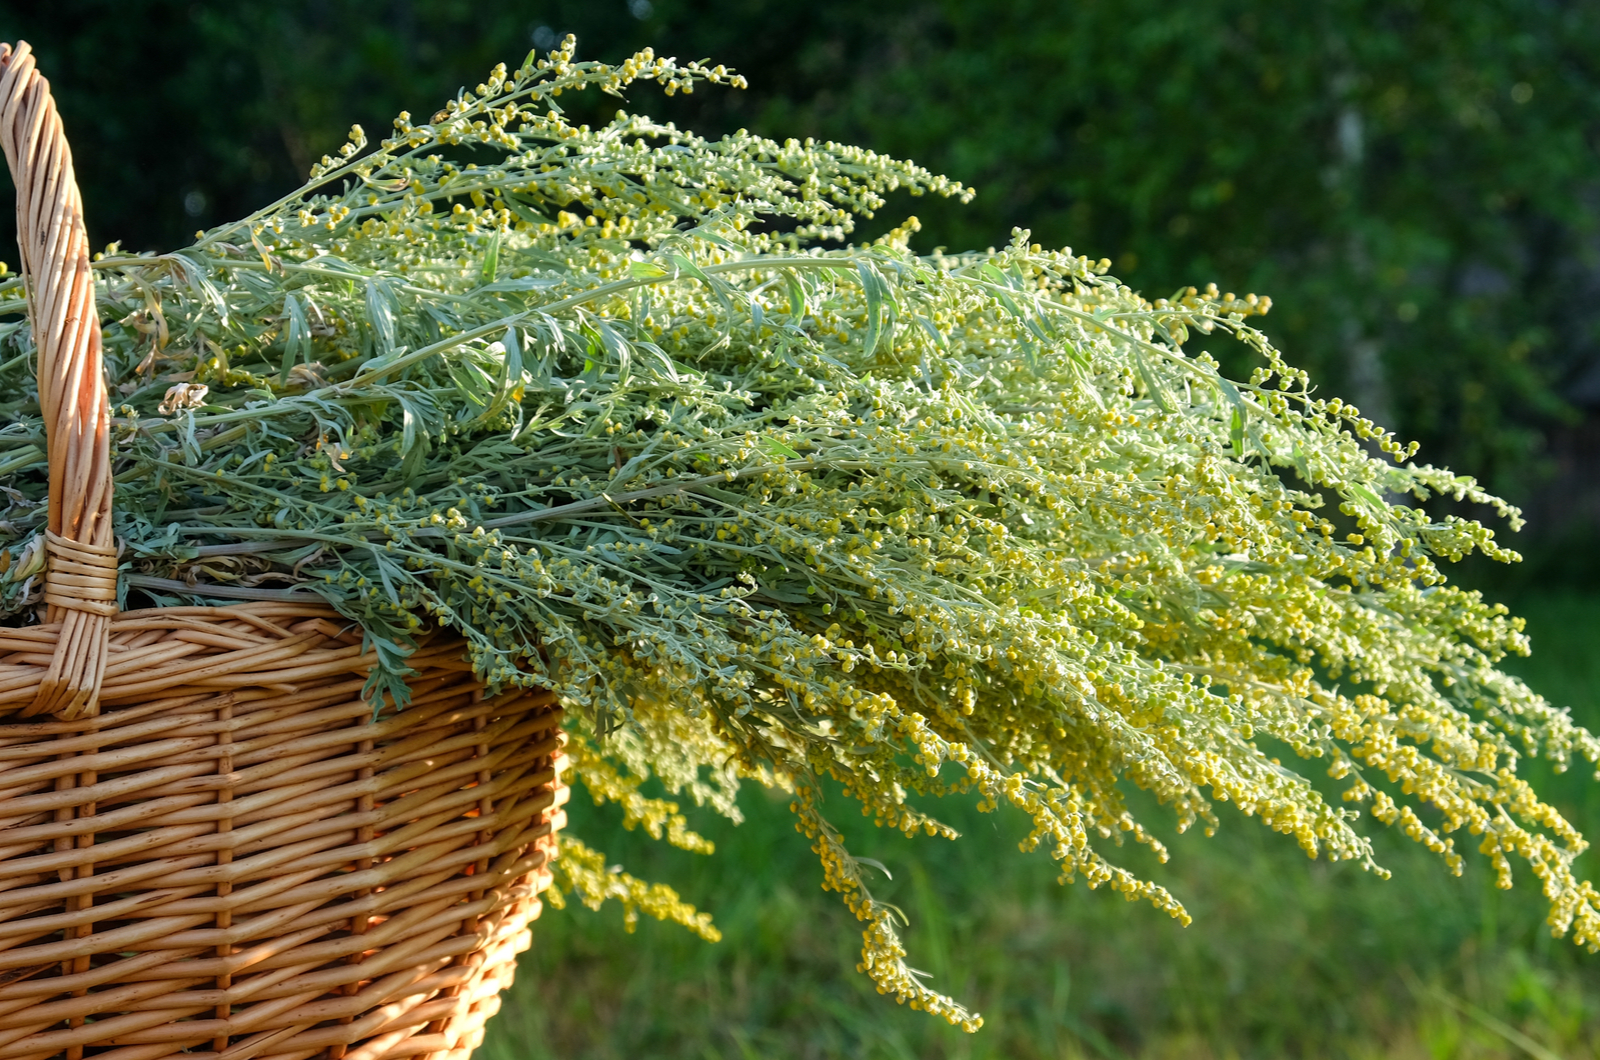 Wormwood Leaves And Flowers in a basket